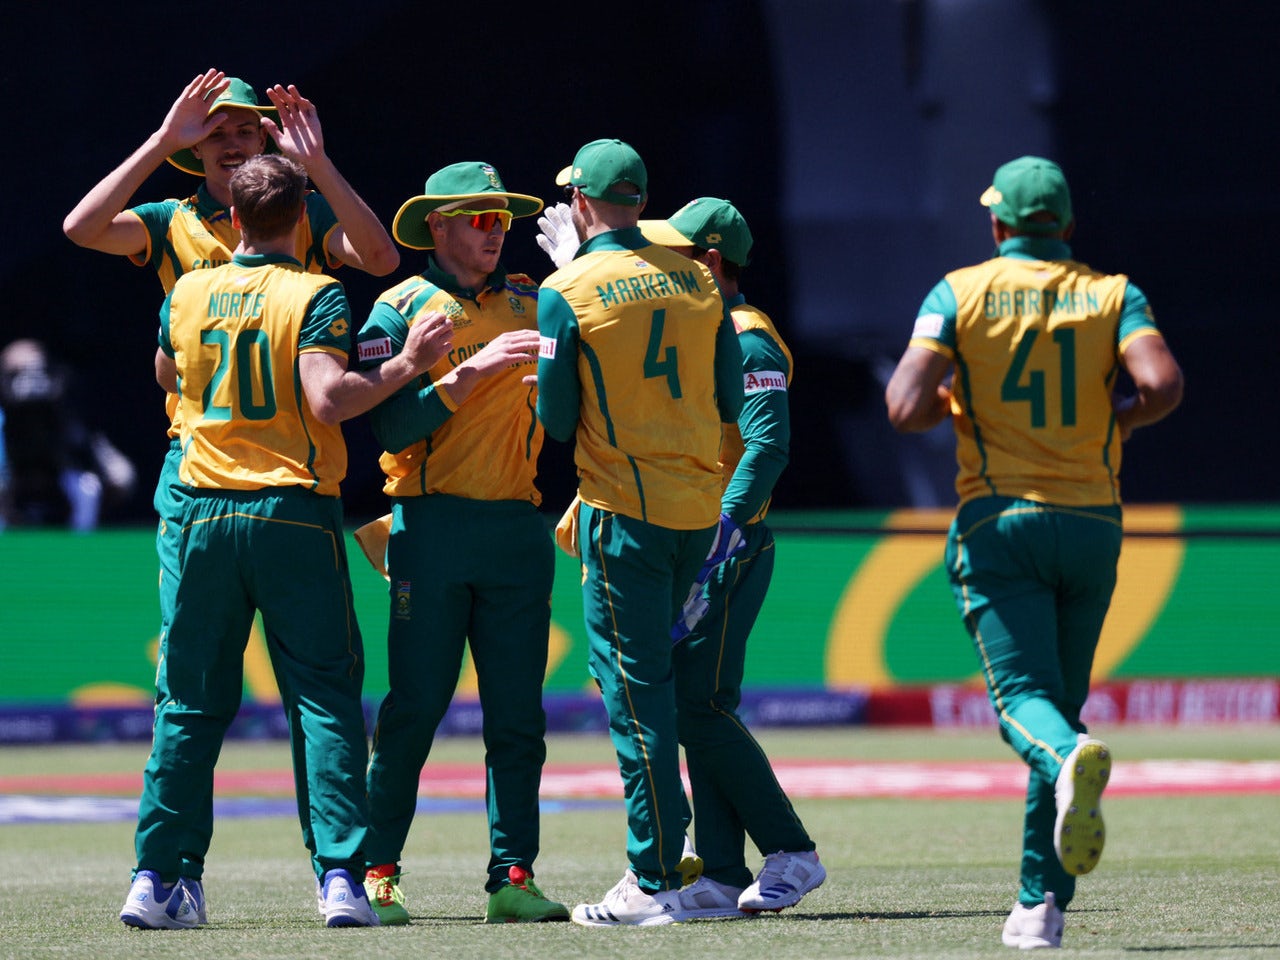 Preview: T20 World Cup: South Africa vs. Afghanistan - prediction, team news, series so far